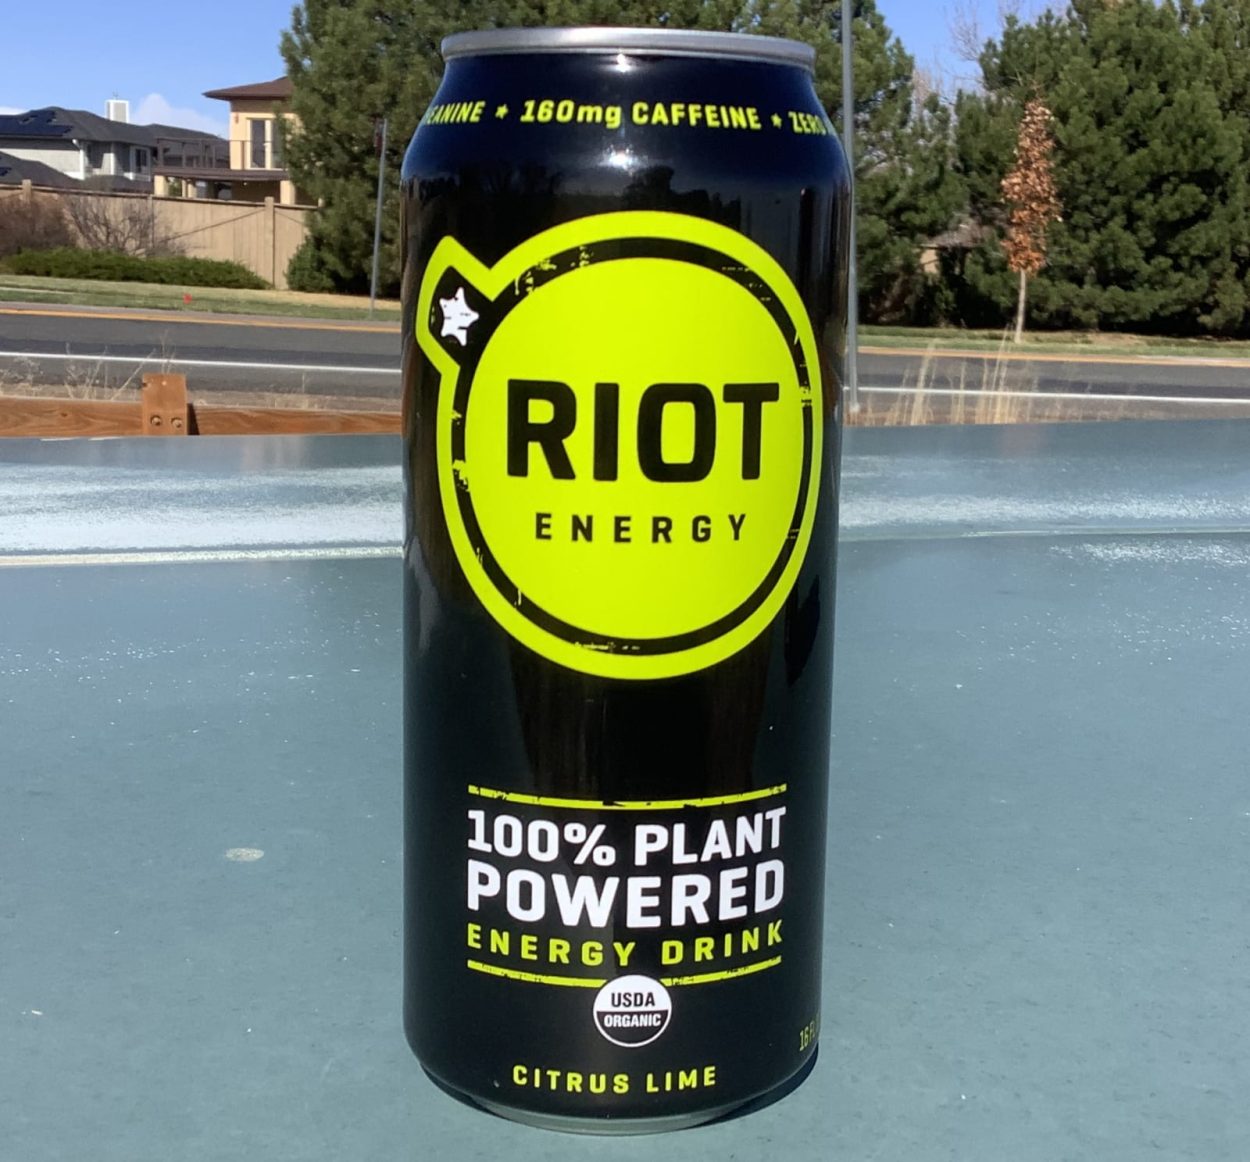 Riot energy is a natural energy drink